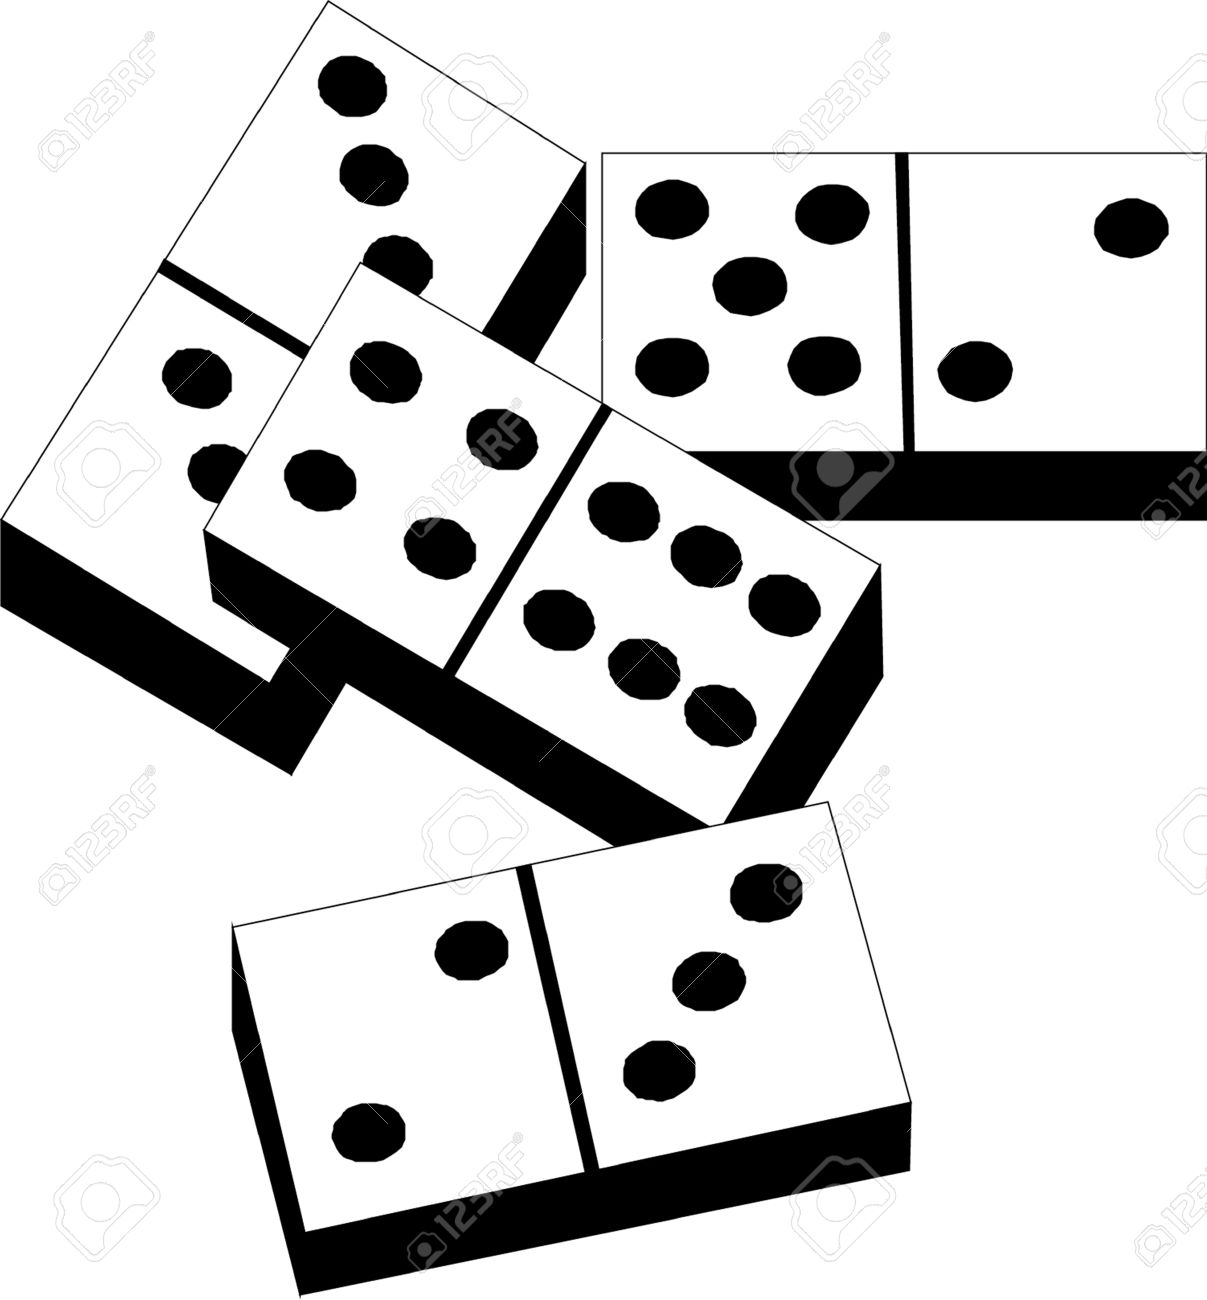 80 Hand Picked How To Draw Dominoes.